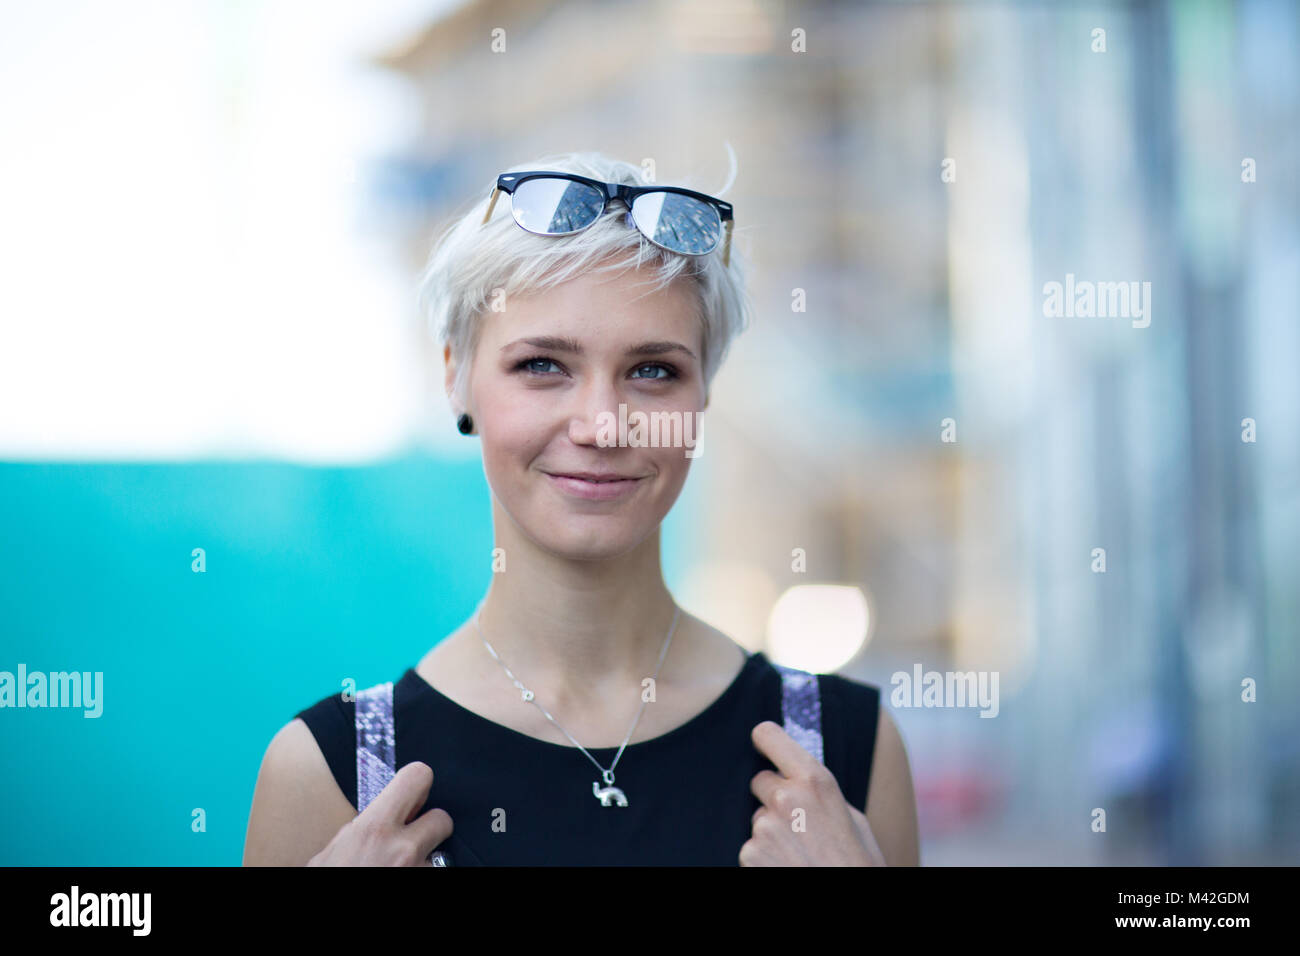 Young adult walking down street in a city Stock Photo